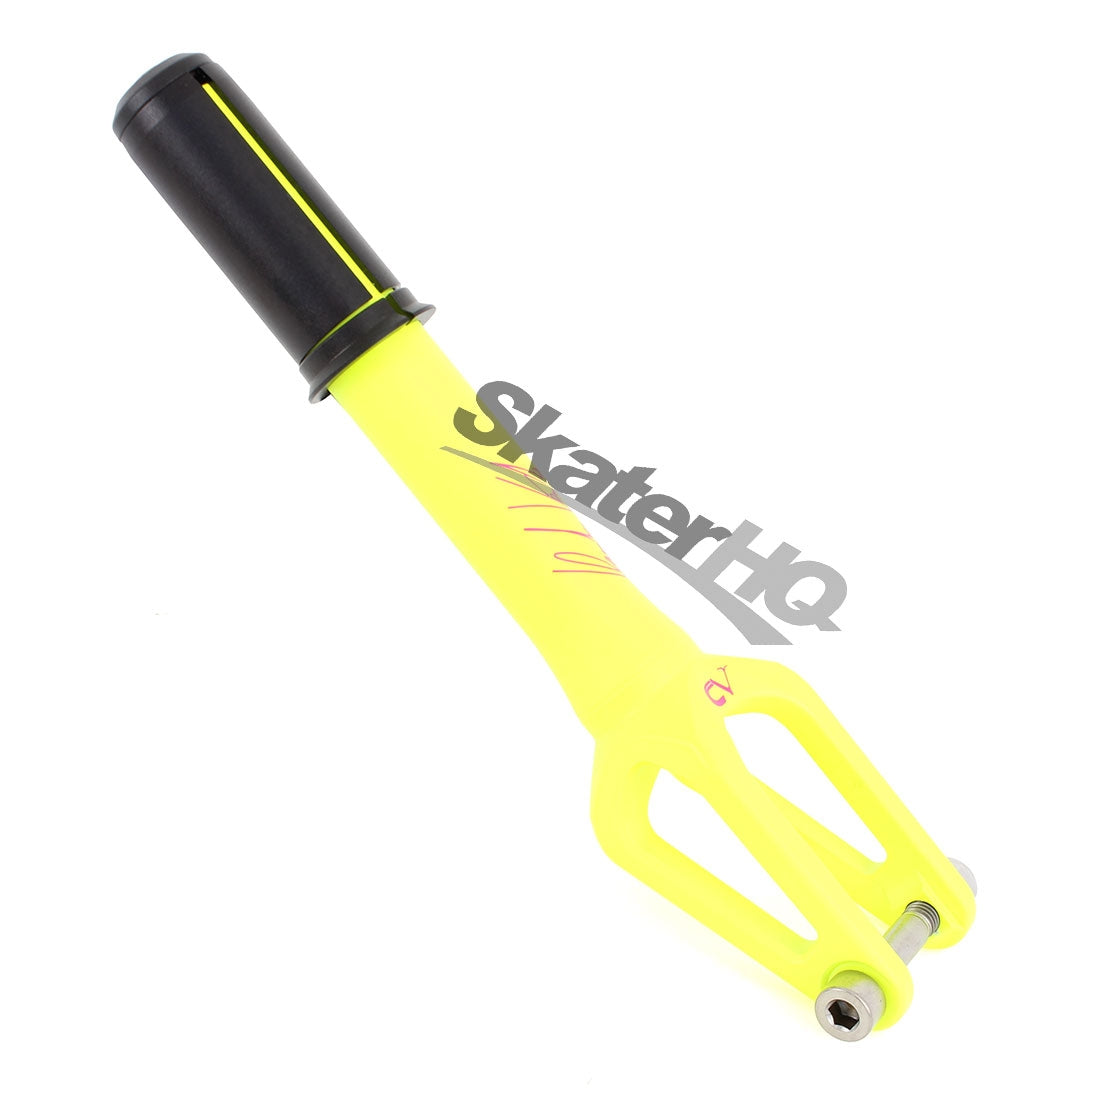 Sacrifice CV IHC Fork - Neon Yellow Scooter Forks